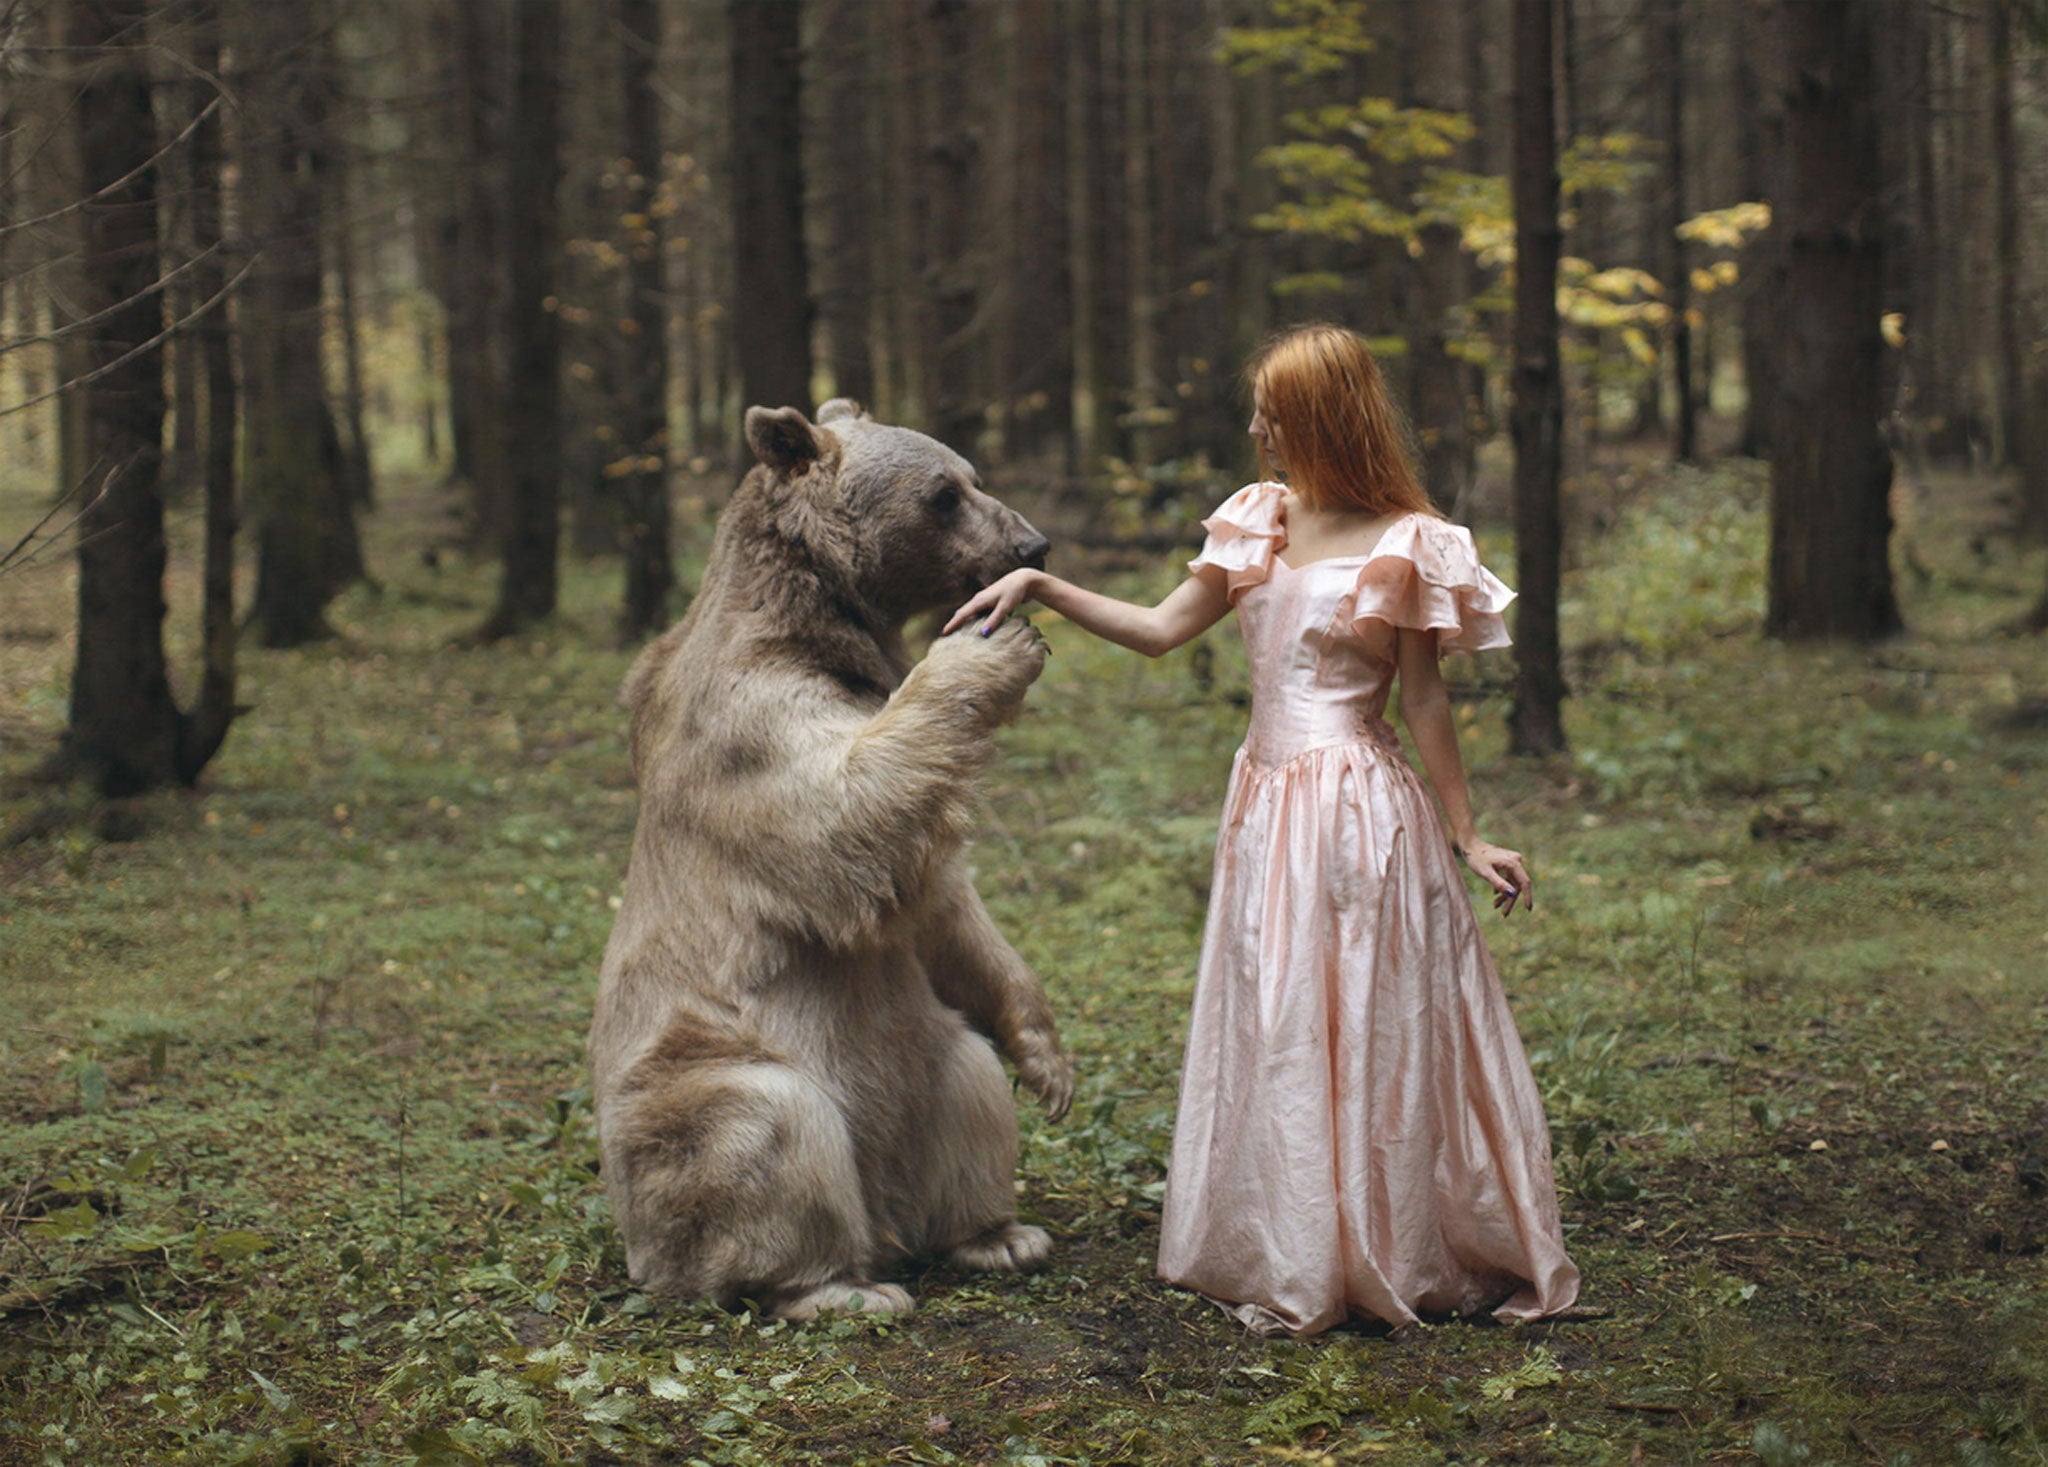 Russian photographer Katerina Plotnikova captured the scenes with the help of two professional animal trainers